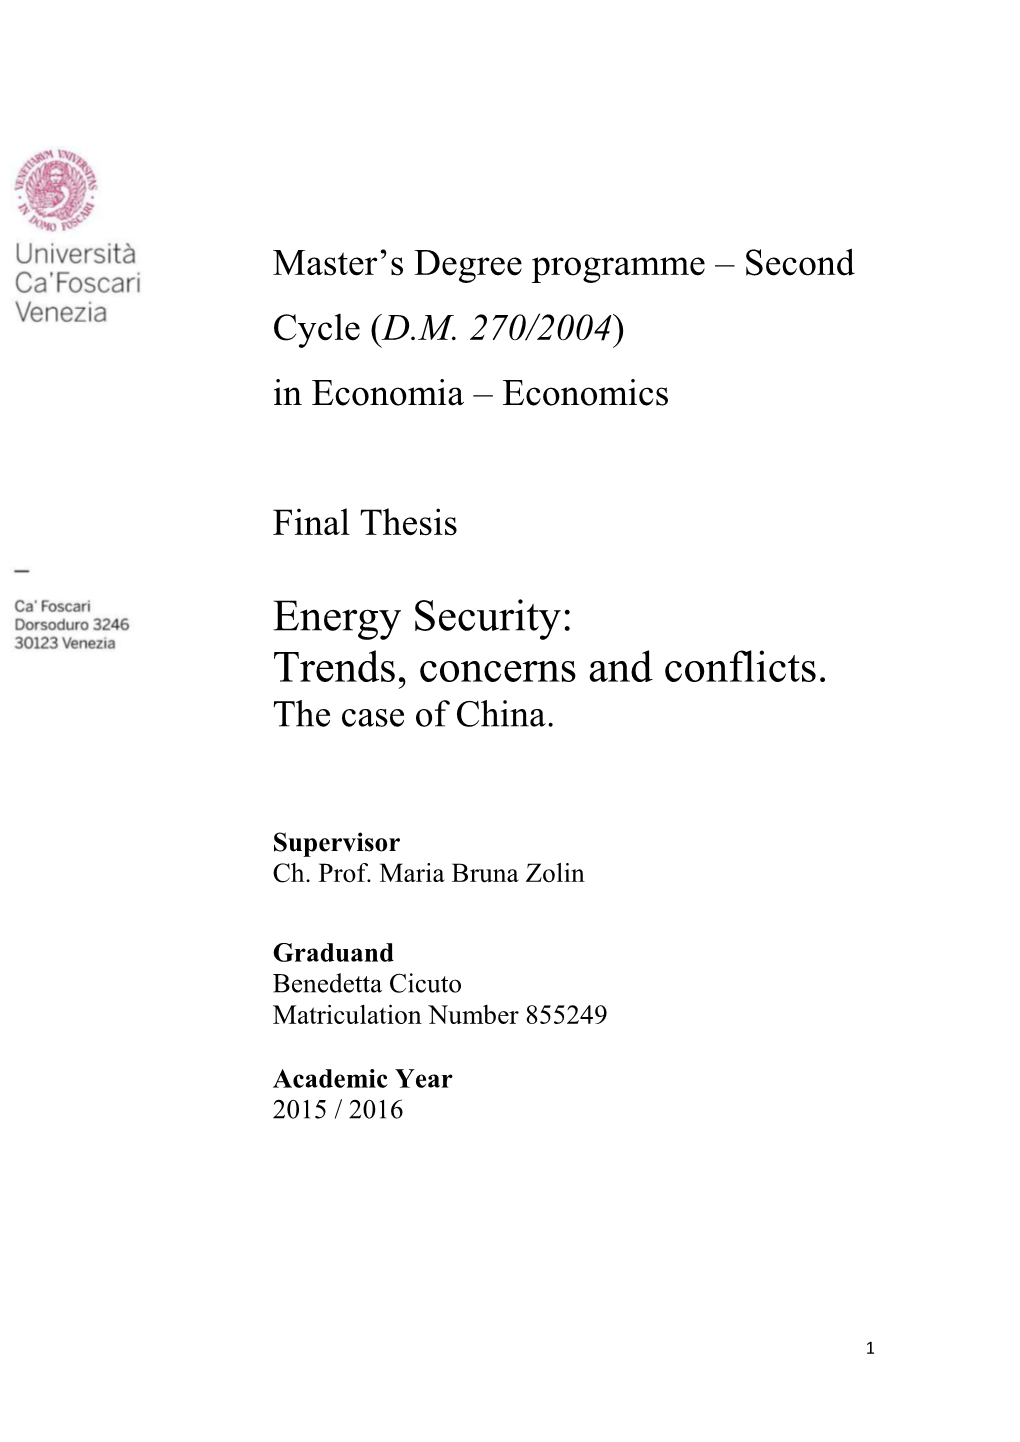 Energy Security: Trends, Concerns and Conflicts